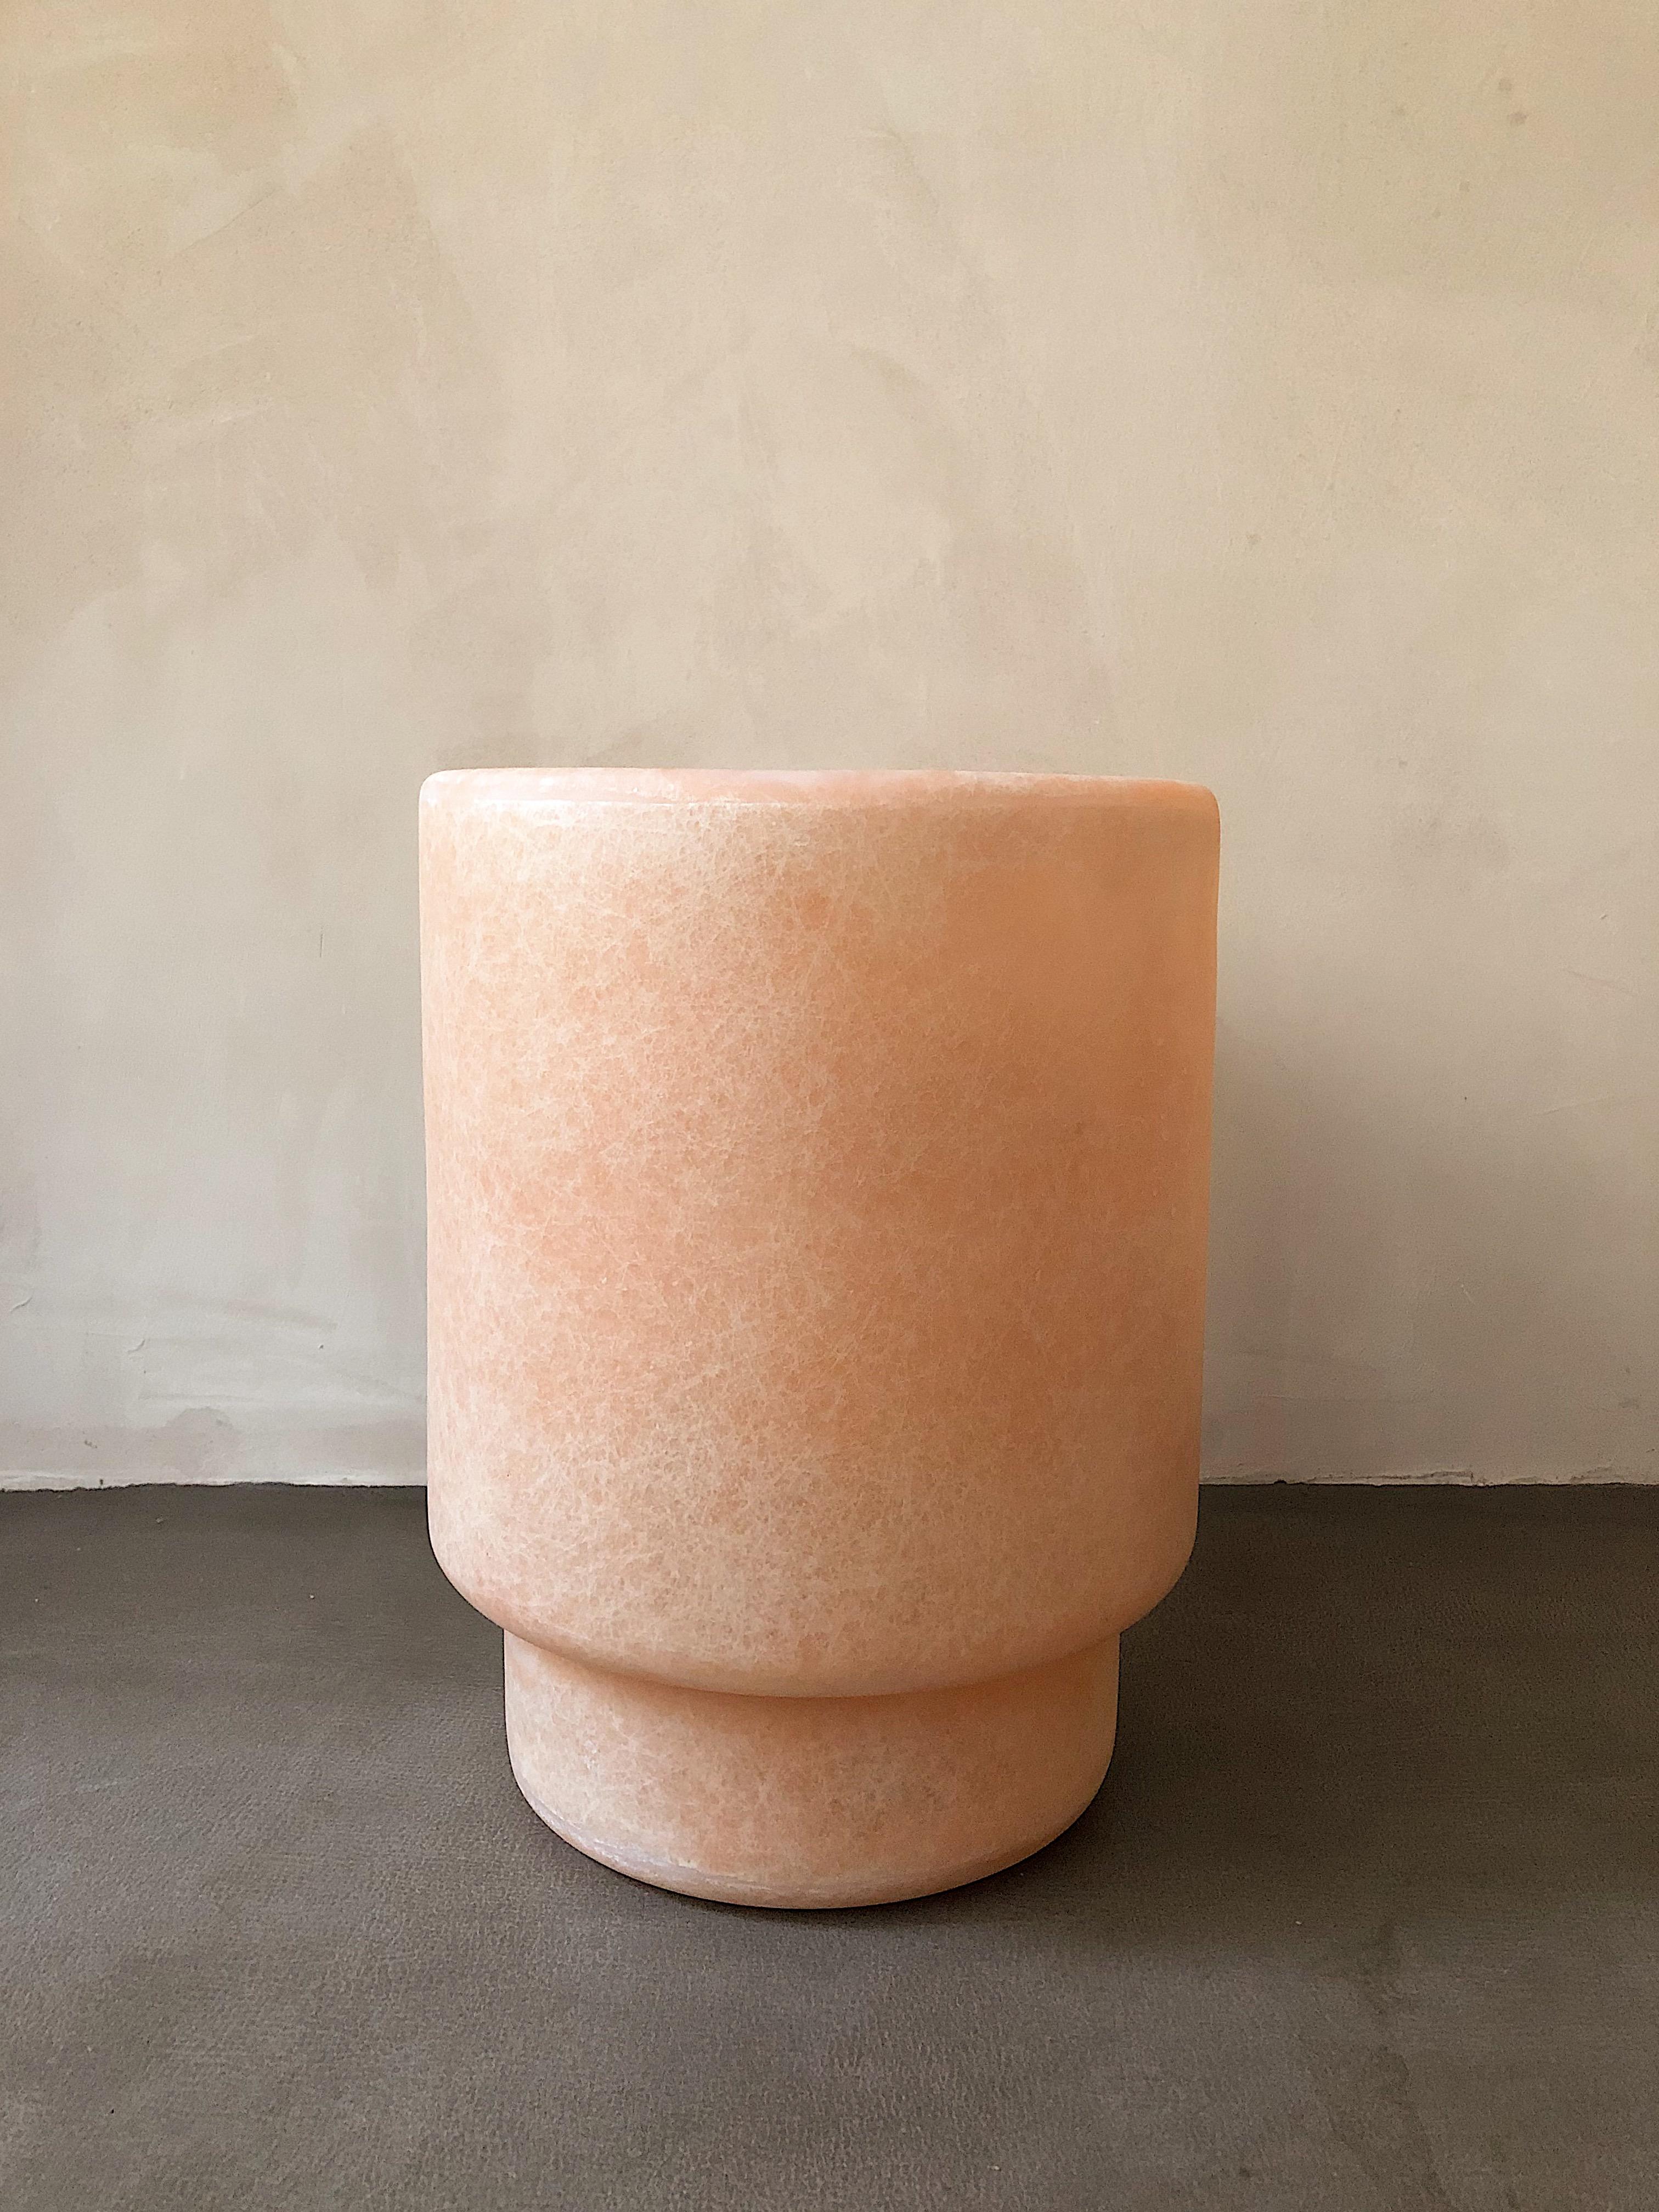 Tong pink vase by Karstudio.
Materials: FRP
Dimensions: 26 x 26 x 34 cm

*This piece is suitable for outdoor use.

A smooth shape for integrating into any space. Multiple-use as a flower vase, a container for blueprints, posters, or as it